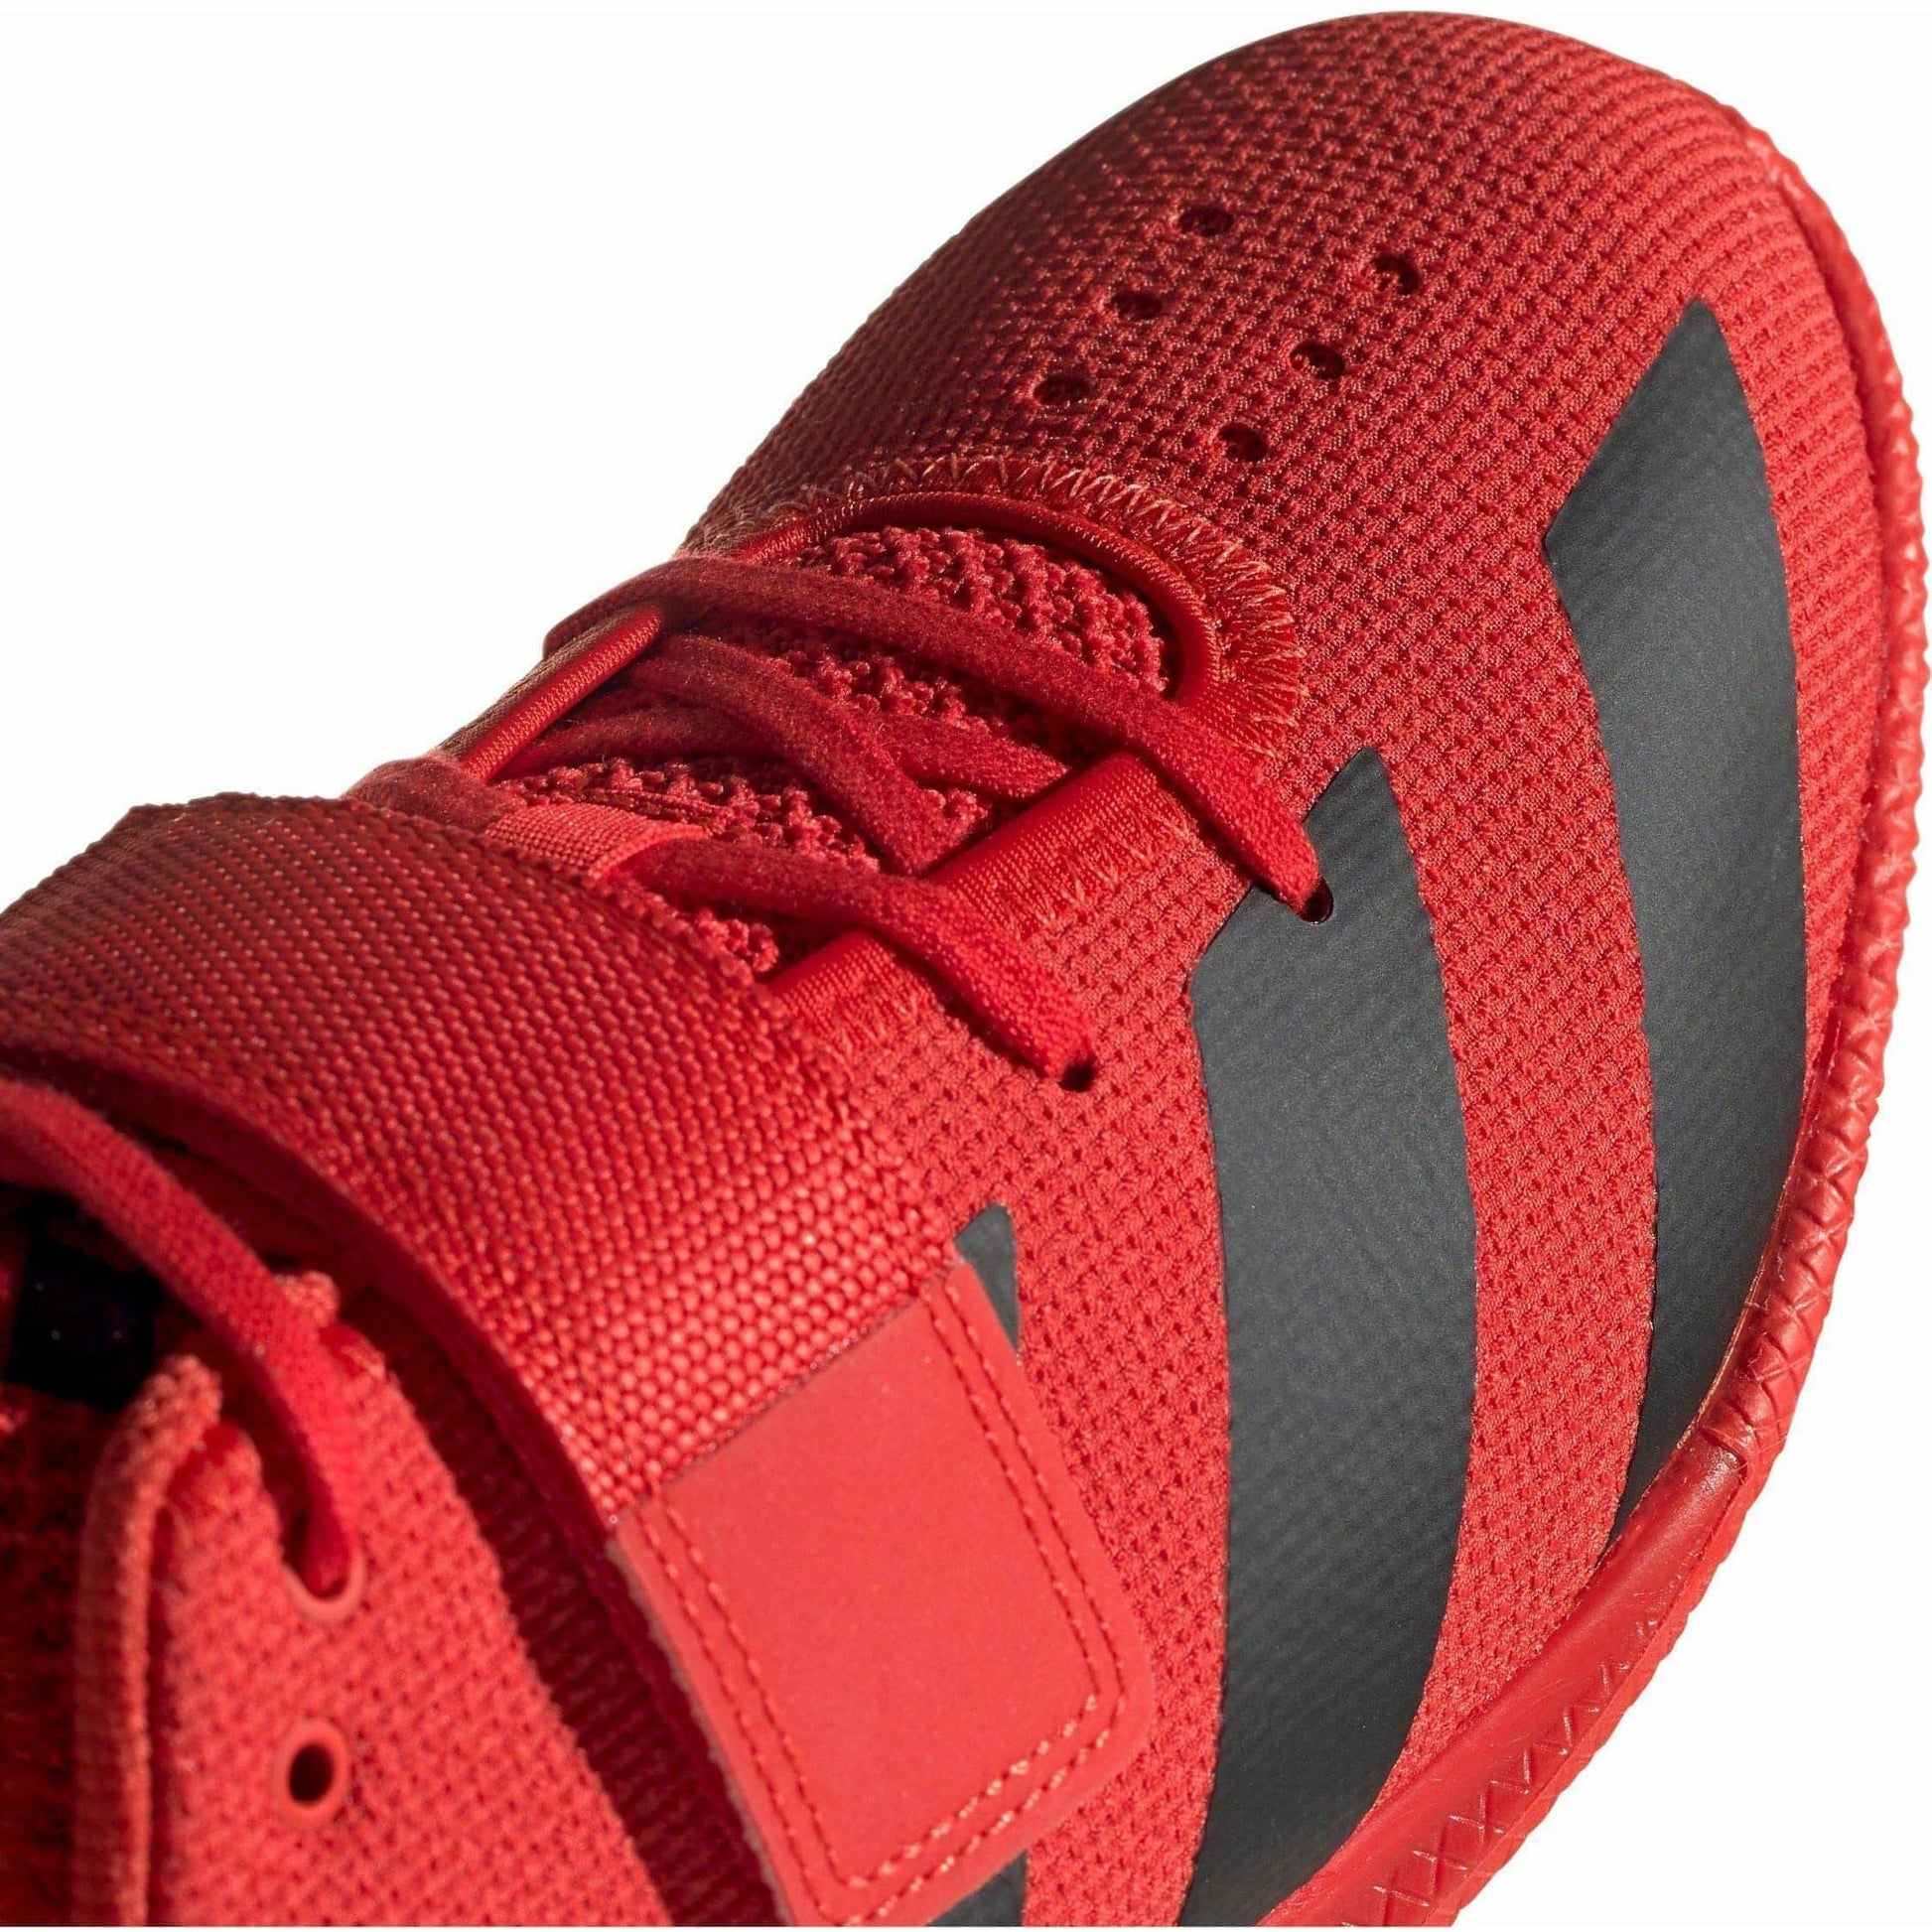 adidas Adipower 2 Weightlifting Shoes - Red - Start Fitness